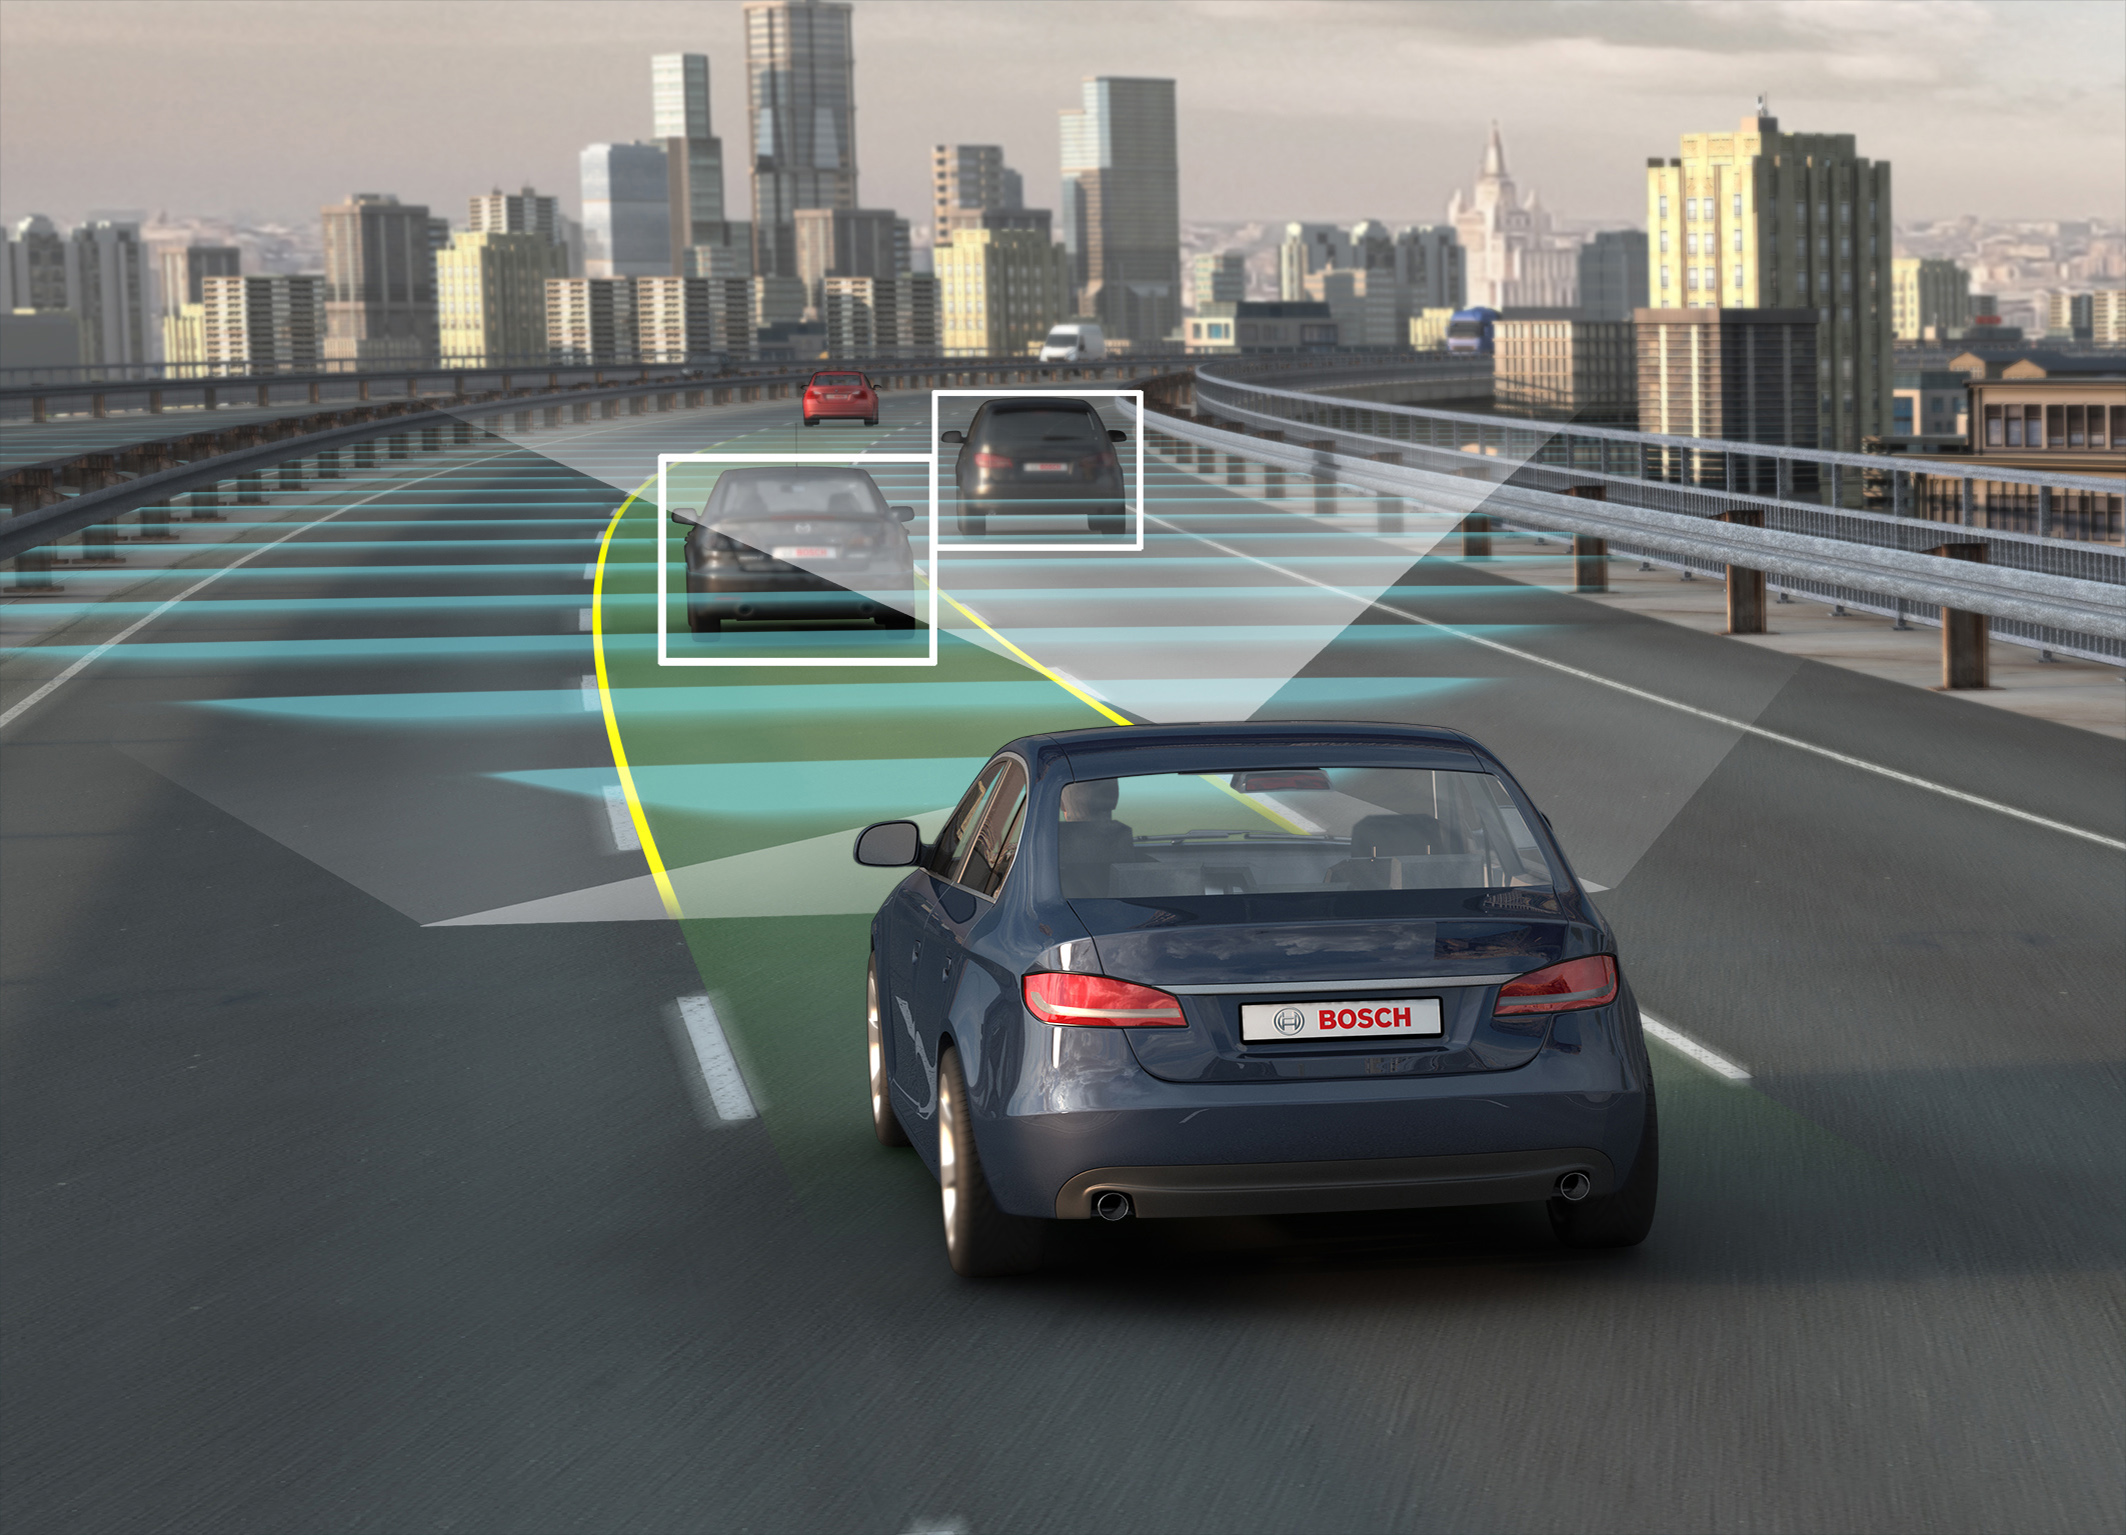 Automated Vehicles: The Hot New Arena for Sensors and Mapping 2